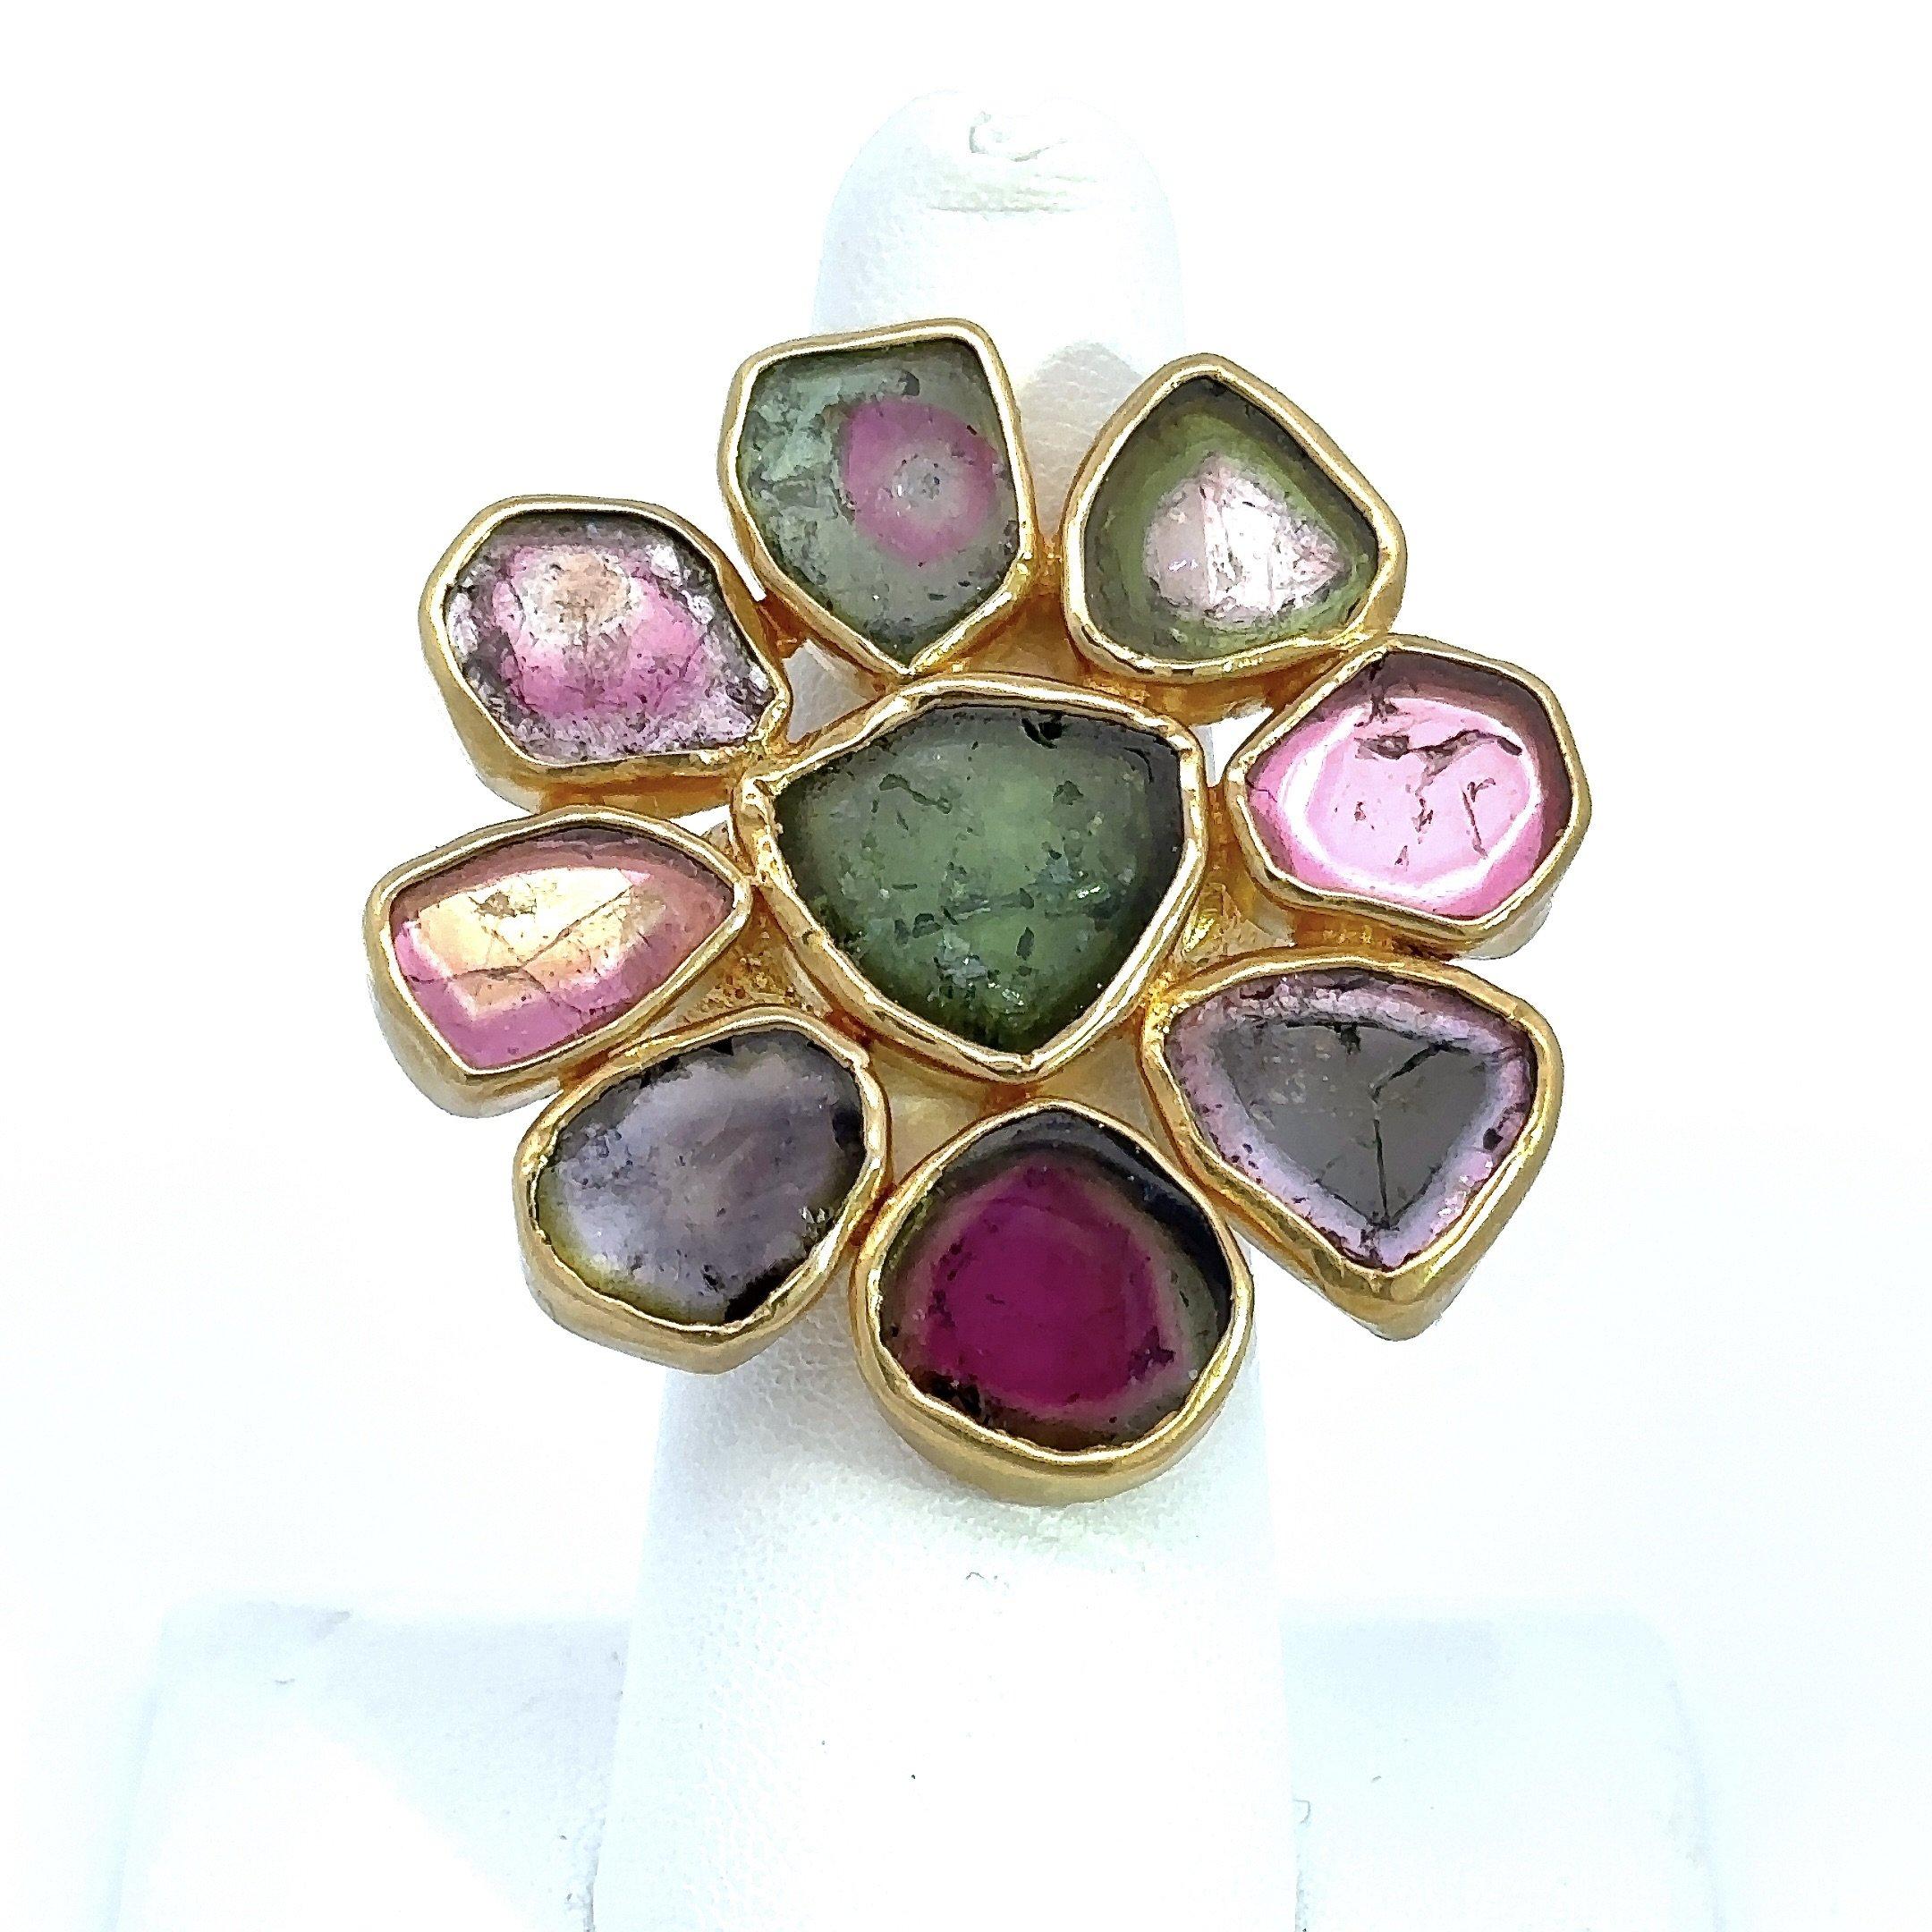 This striking floral design cocktail ring features a burst of vibrant shades of green, pink, purple and watermelon tourmaline, bezel-set in a rich 21K yellow gold. The top of the ring measures approximately 1.5” inches x 1.5” inches and the shank